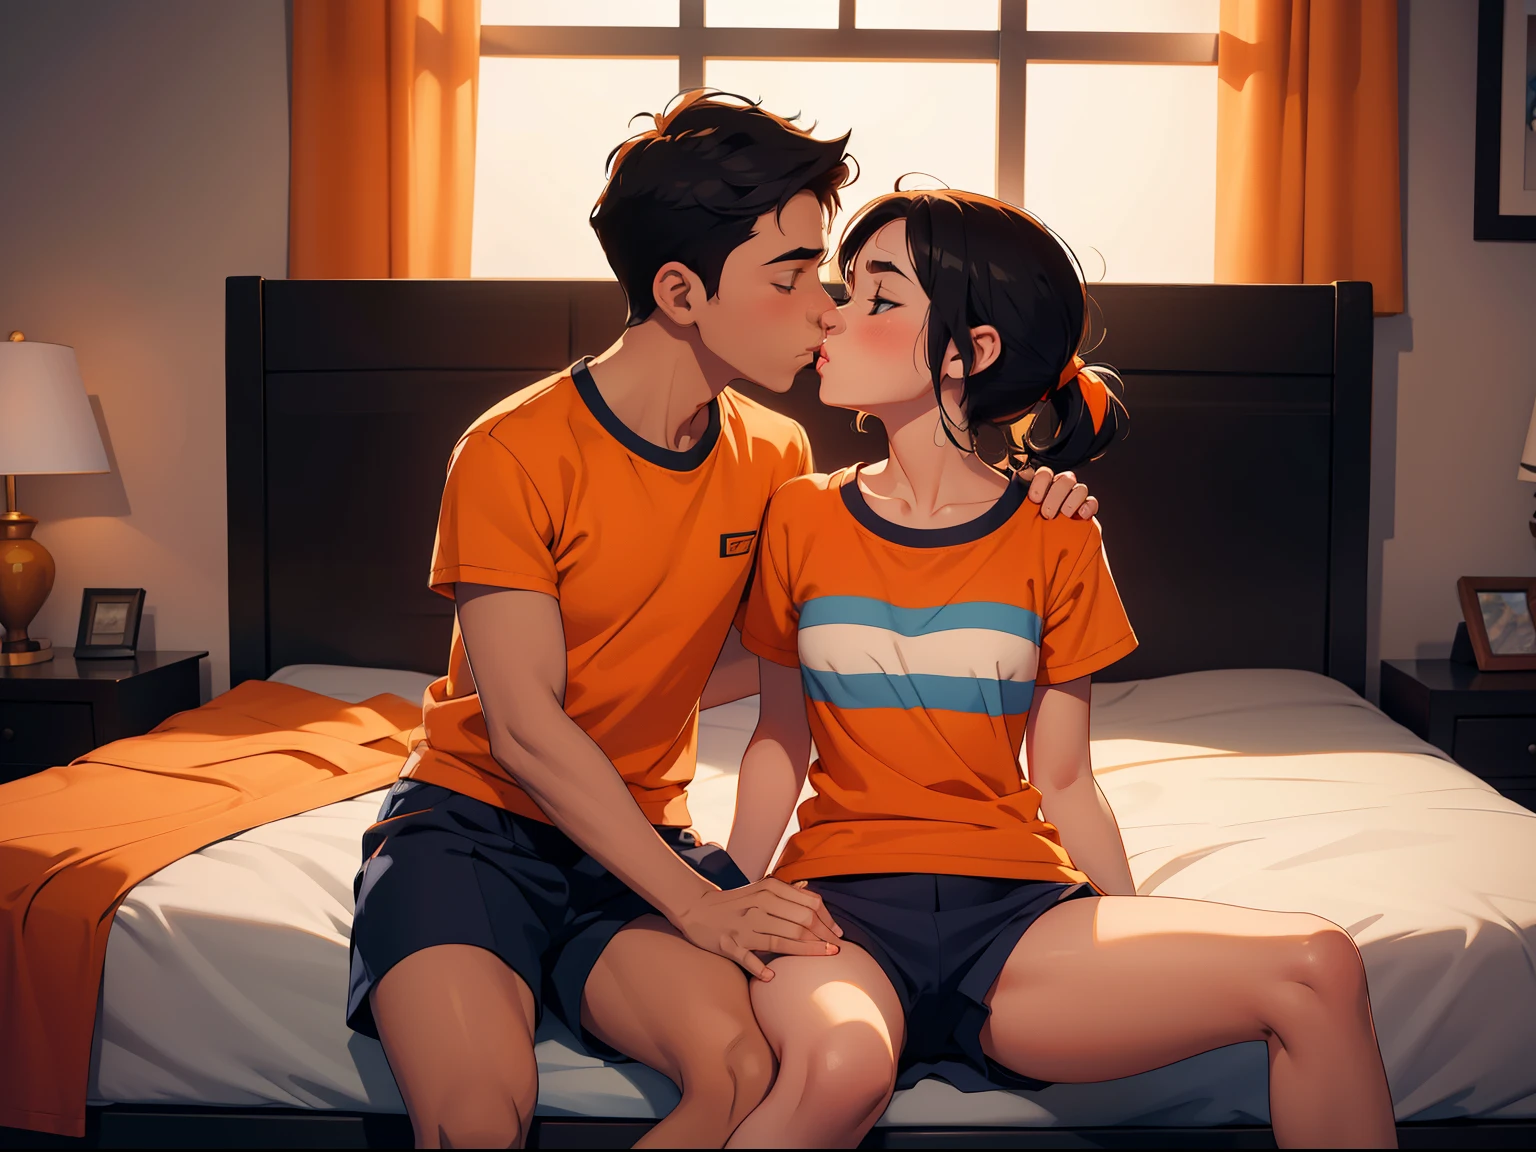 Young girl wearing white and orange striped t shirt and orange shorts and young boy wearing a navy blue t shirt and black shorts sitting on a bed together, kissing, making out, passionately, sexy, hot, lustful